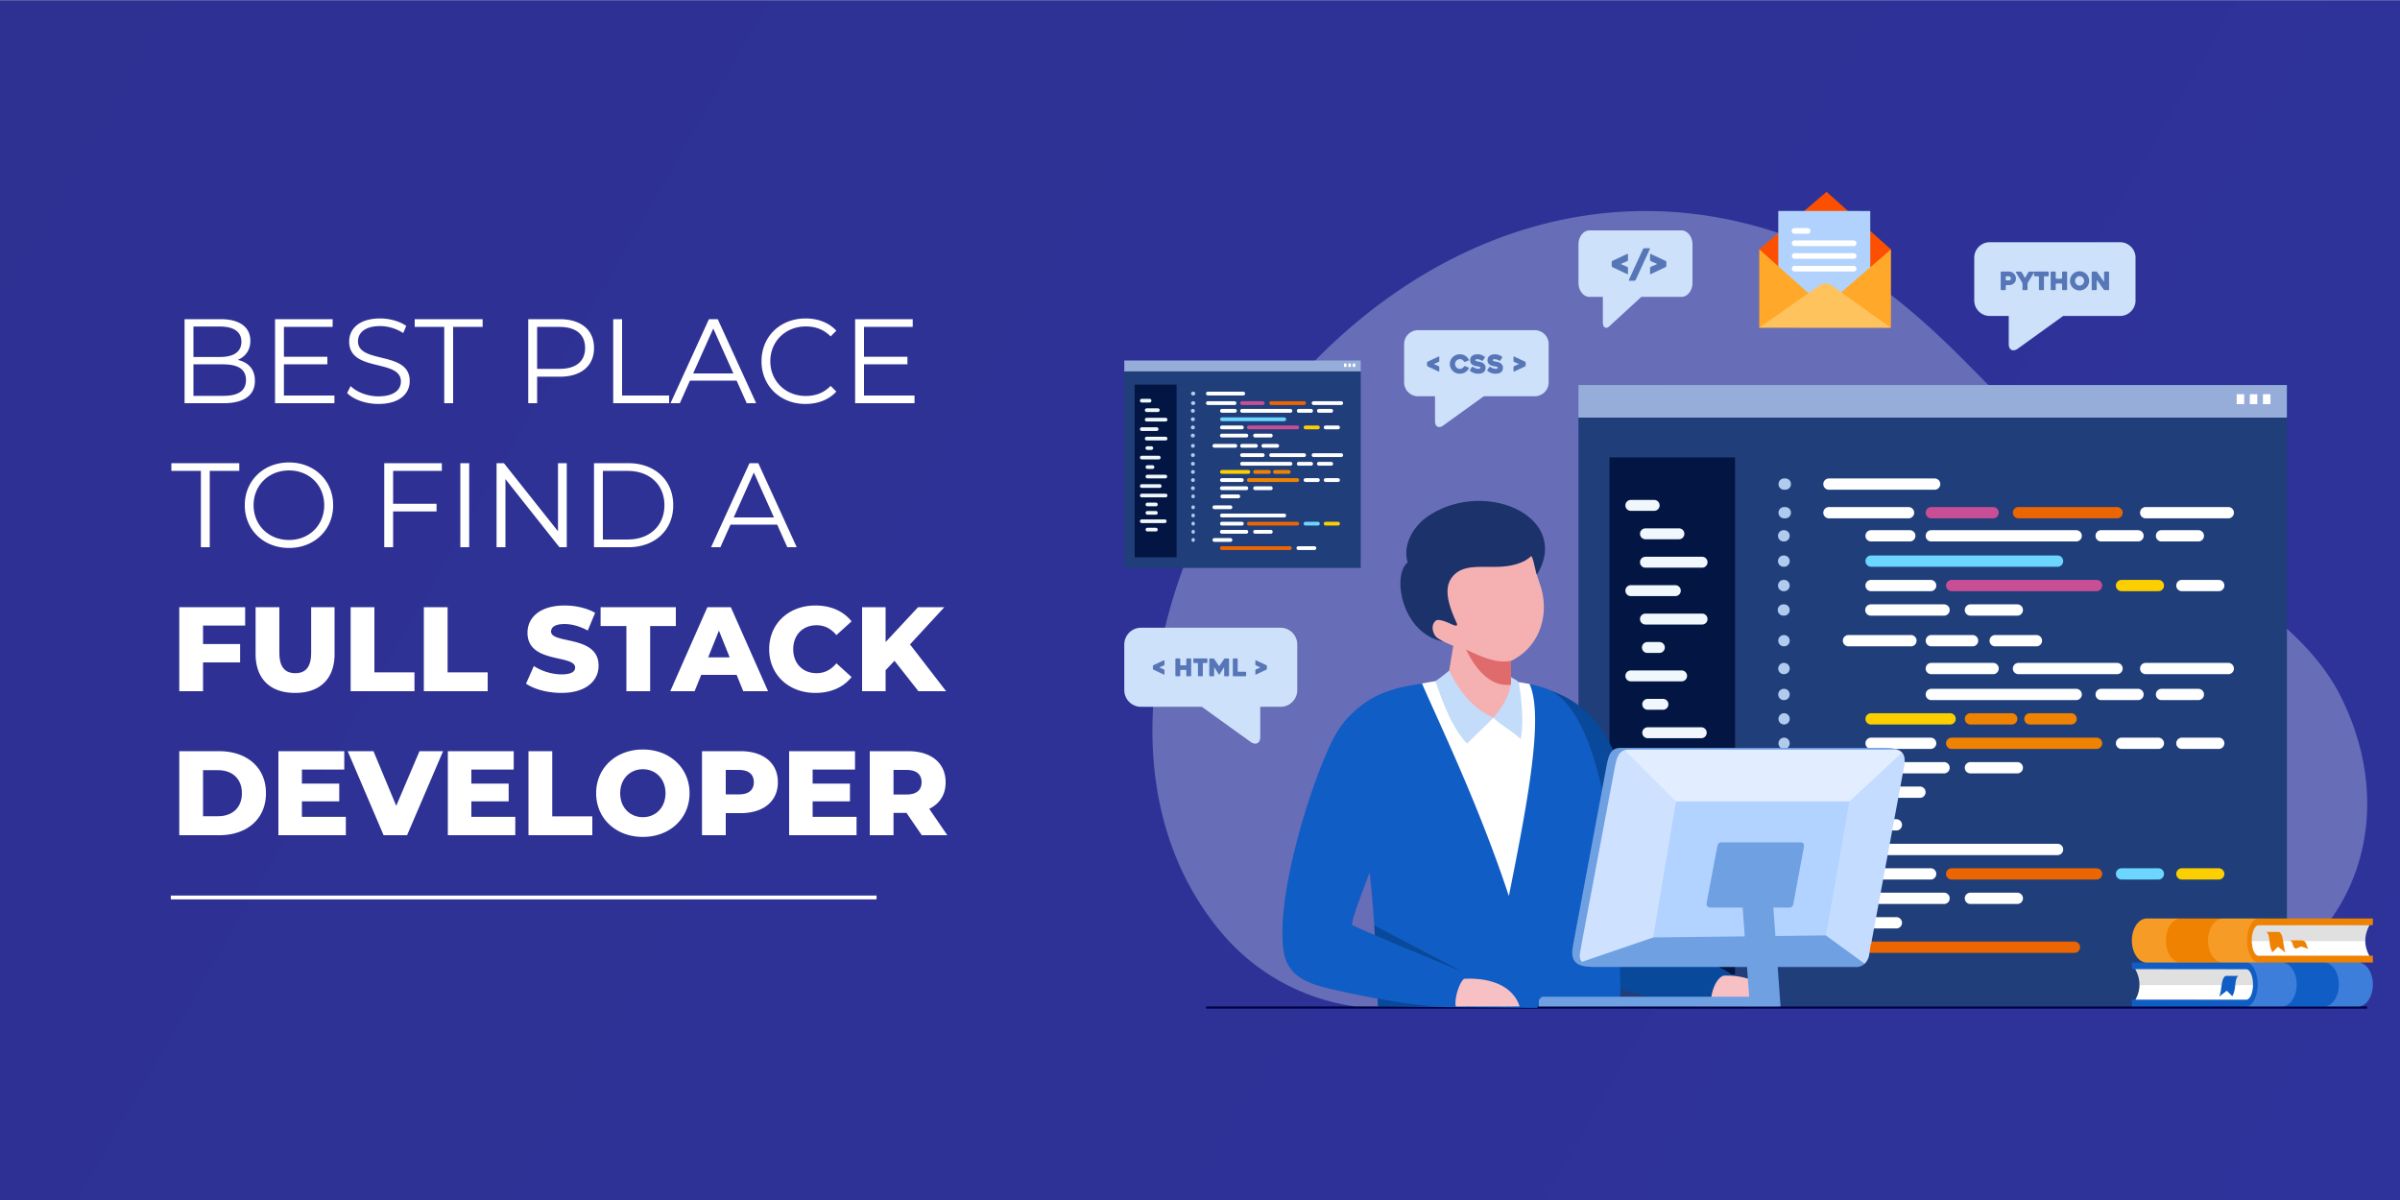 Best Place to Find Full Stack Developer